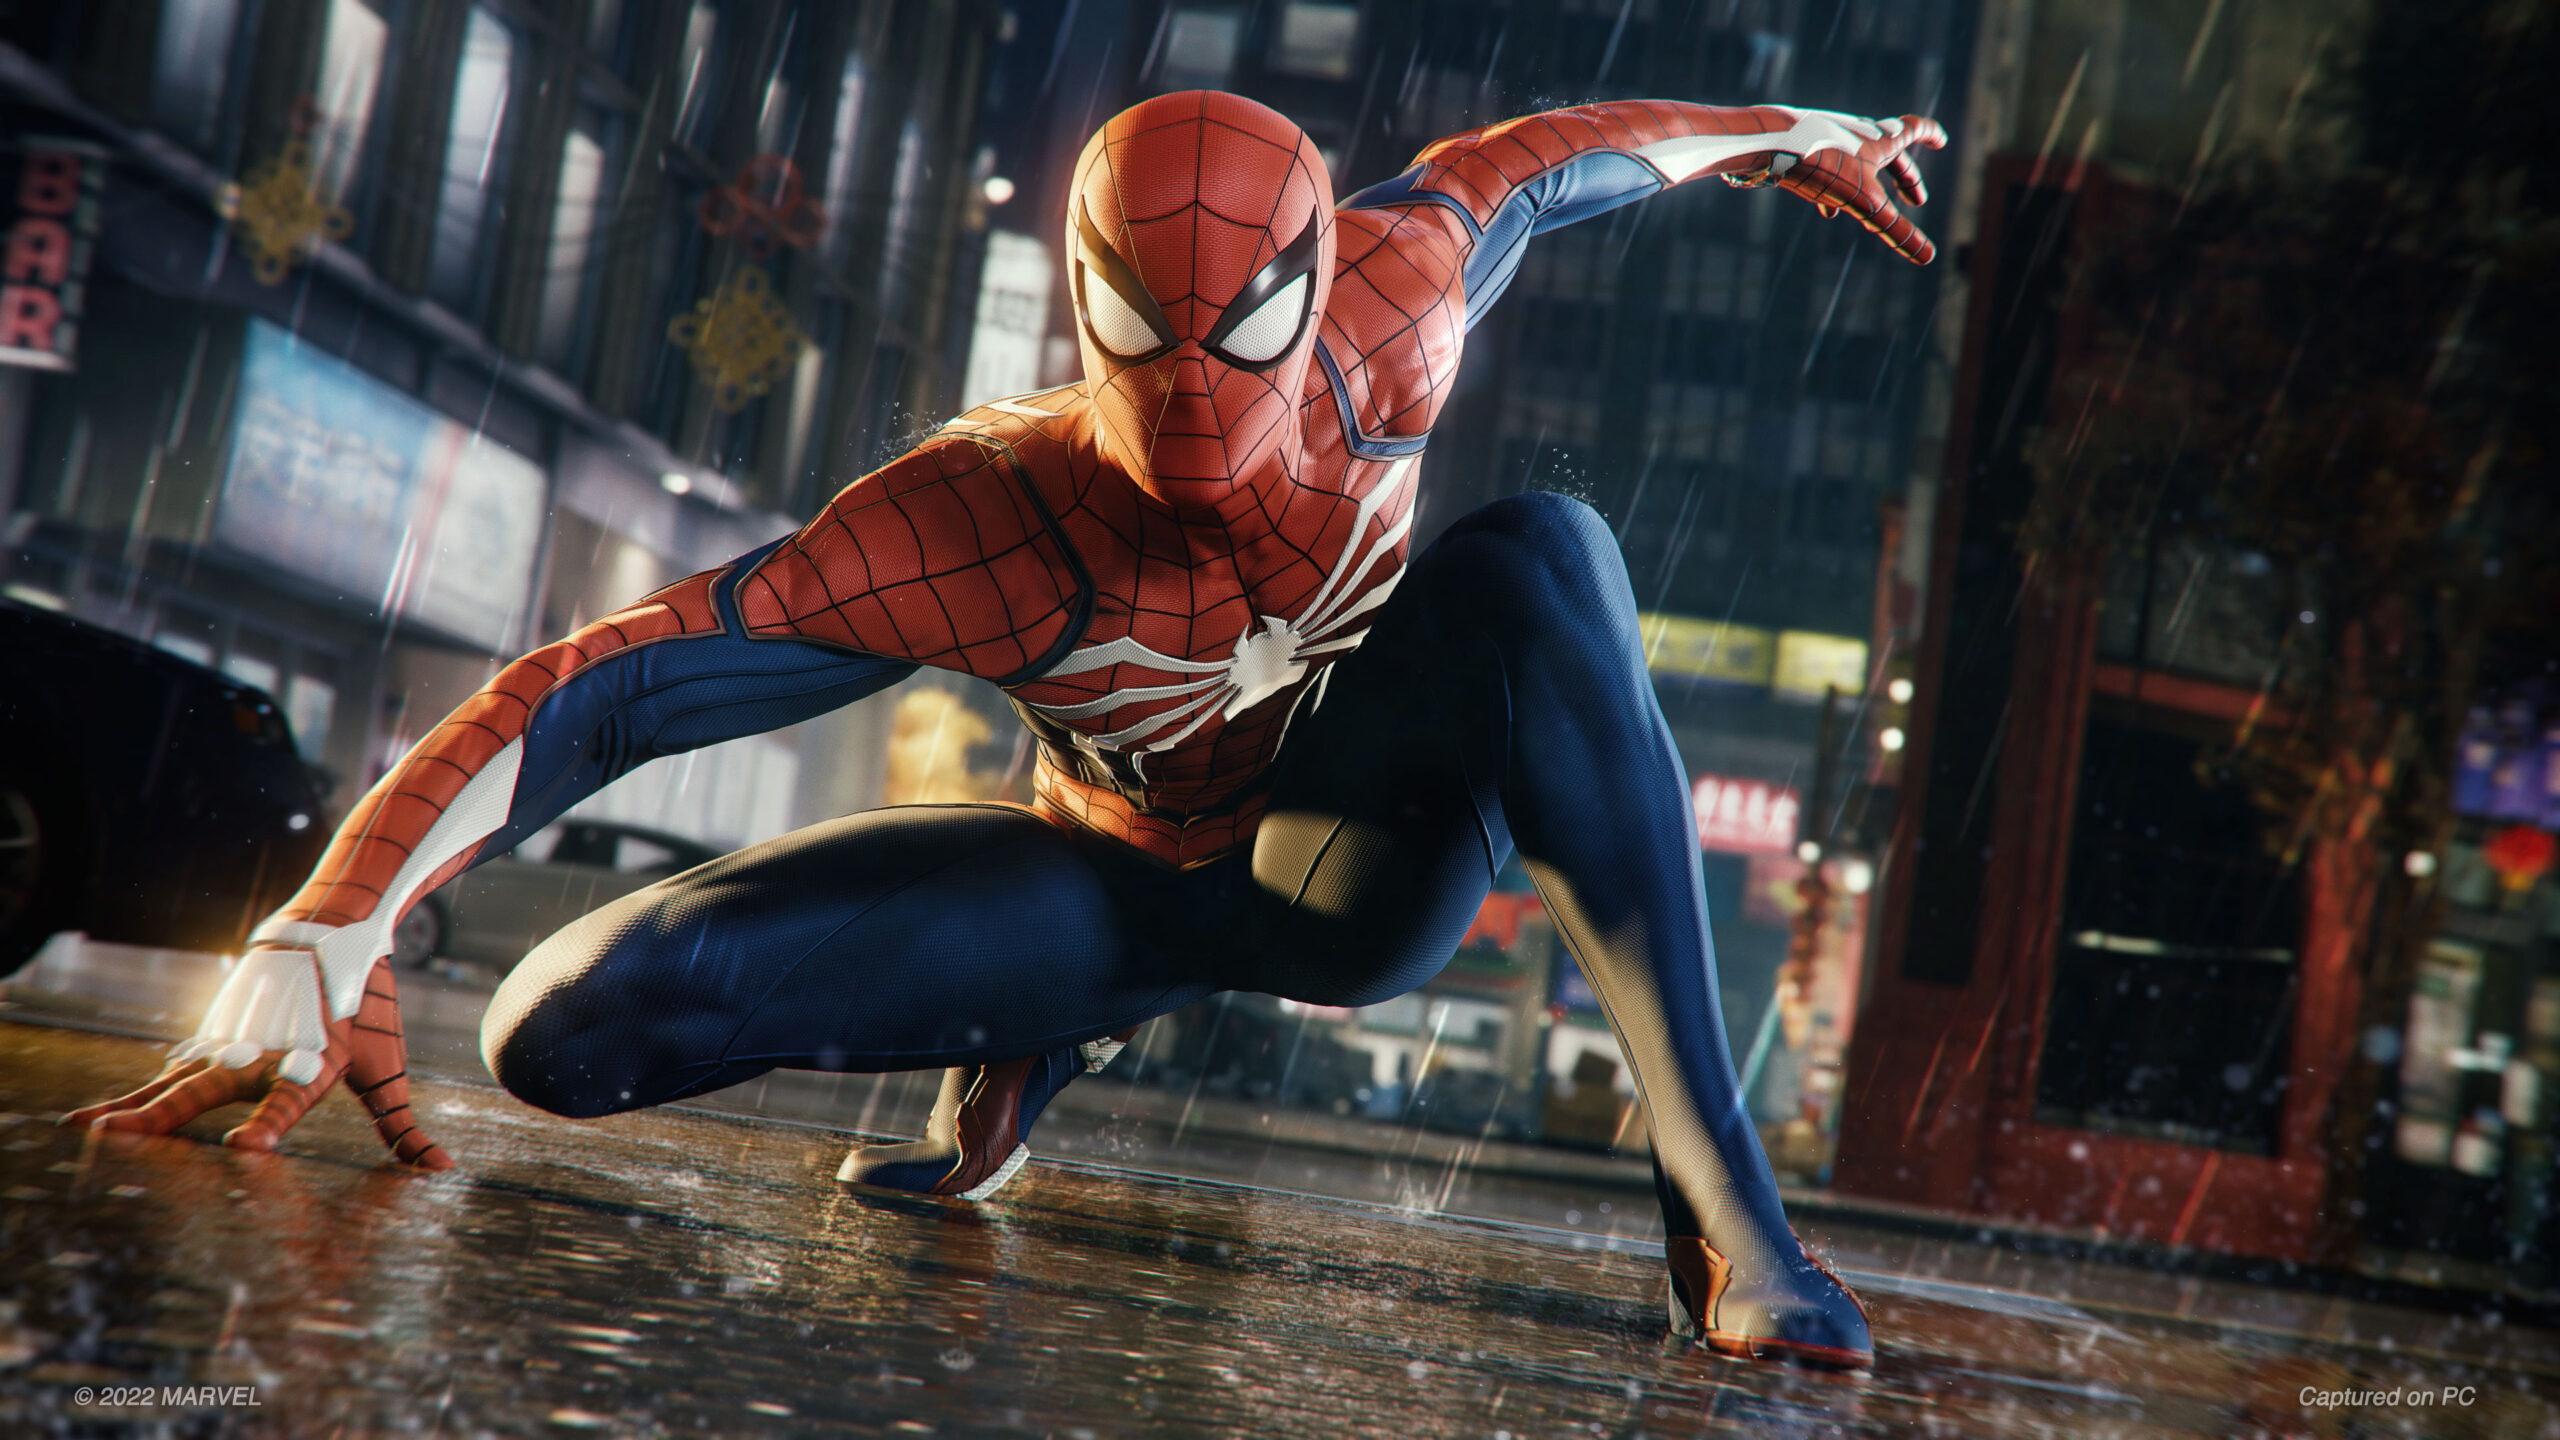 Spider-Man Remastered PC Patch Notes Bug Fixes, Improvements, And More - GameSpot